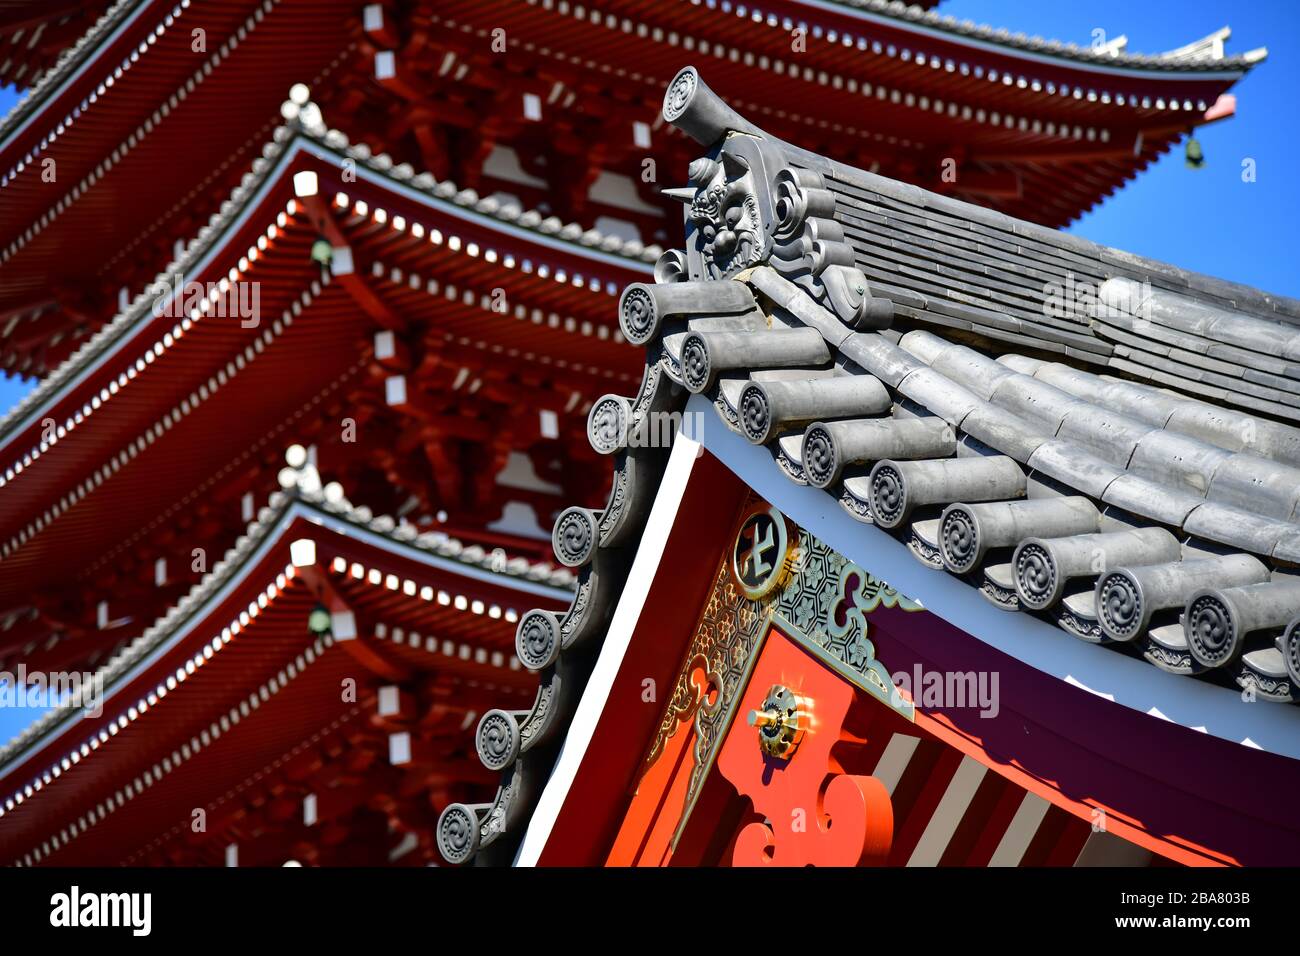 Tokyo, Japan - October 2019: low angle close up view of the Sensoji temple in Tokyo with its characteristic structure in bright red Stock Photo